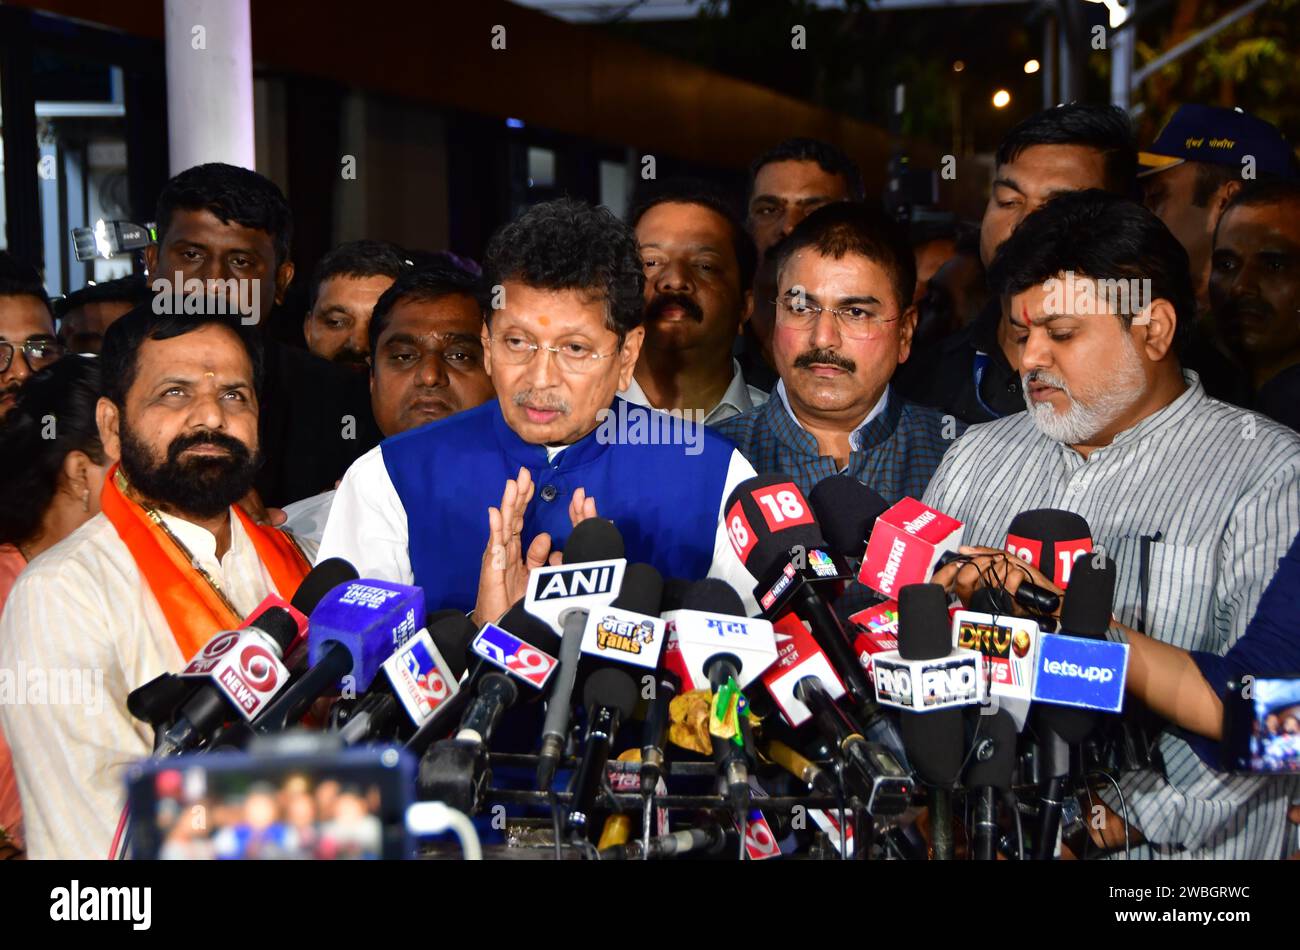 MUMBAI, INDIA - JANUARY 10: Shiv Sena (Shinde faction) MLAs Deepak Kesarkar, Bharat Gogawale, and Uday Samant addressing the media after the verdict in the MLA disqualification case came in their favour, at Vidhan Bhavan on January 10, 2024 in Mumbai, India. The Maharashtra Legislative Assembly Speaker Rahul Narwekar today held that Eknath Shinde led faction was the real Shiv Sena when the rival faction emerged within the party on June 22, 2022. He has refused to disqualify any member from both the factions, led by Shinde and Uddhav Thackeray. Both the factions had filed 34 petitions against Stock Photo